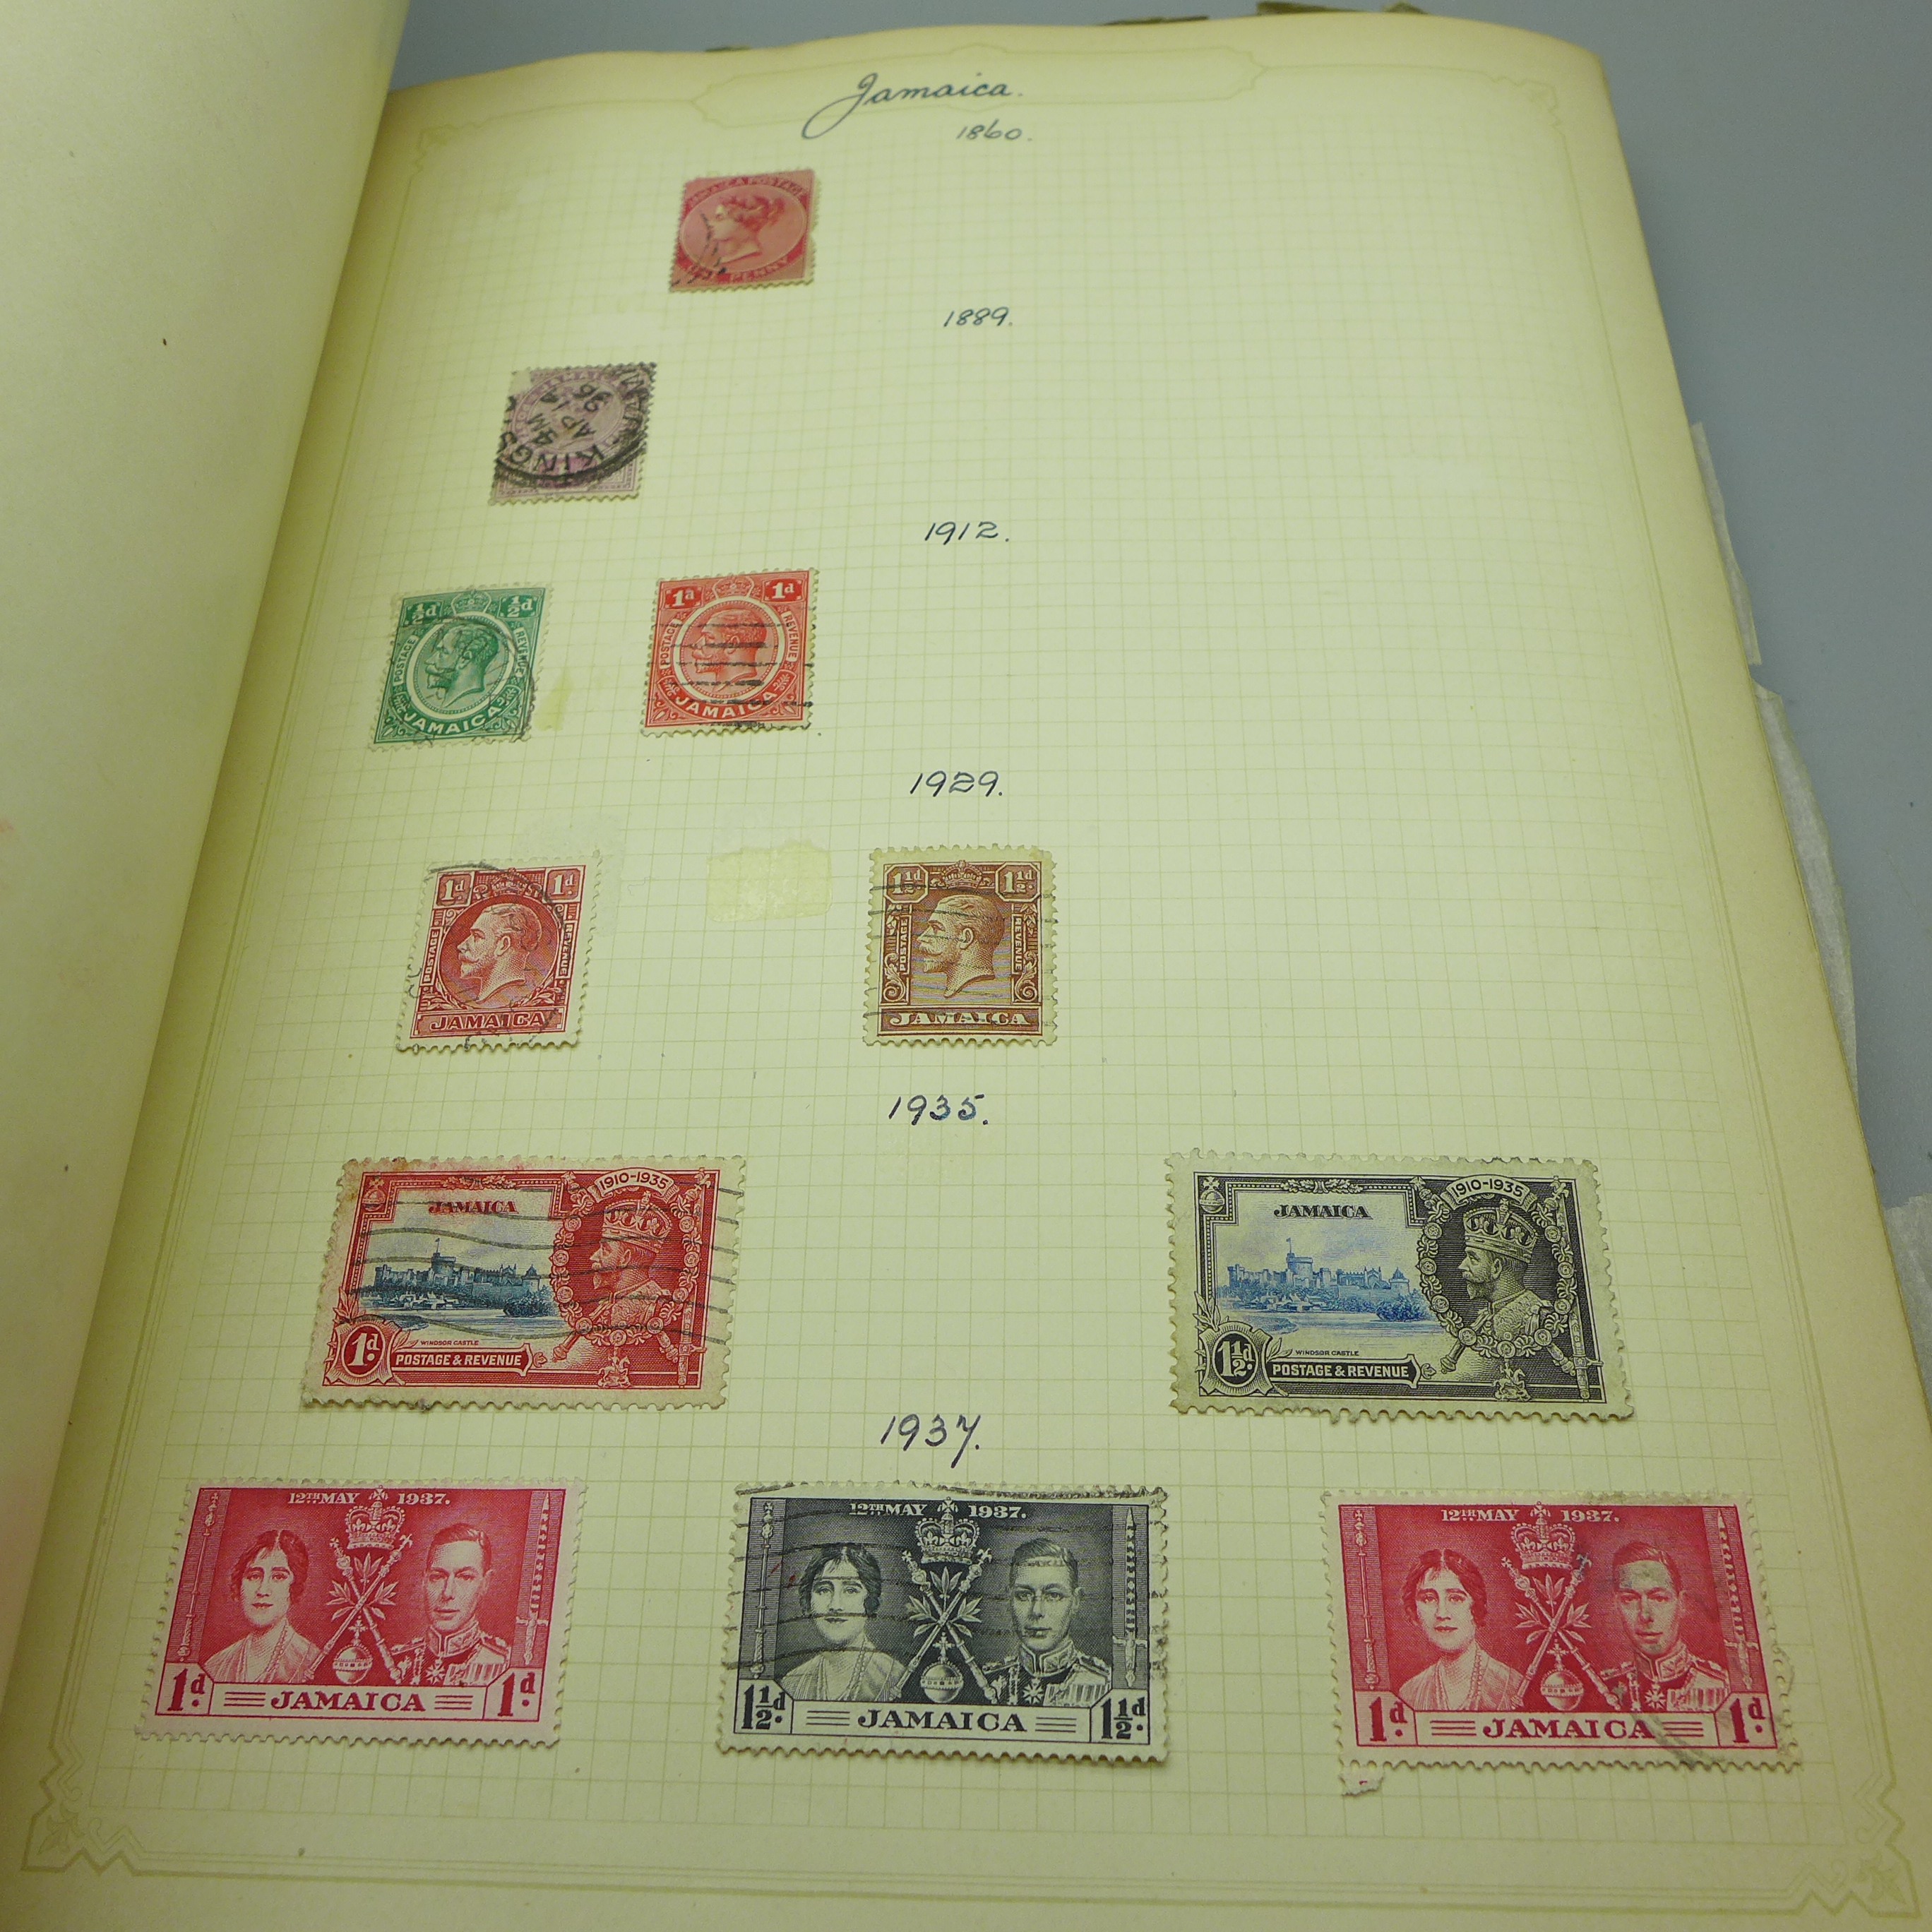 Stamps; an album of GB postage stamps, including Penny Black, a Two Pence Blue, Penny Reds, ( - Image 40 of 42